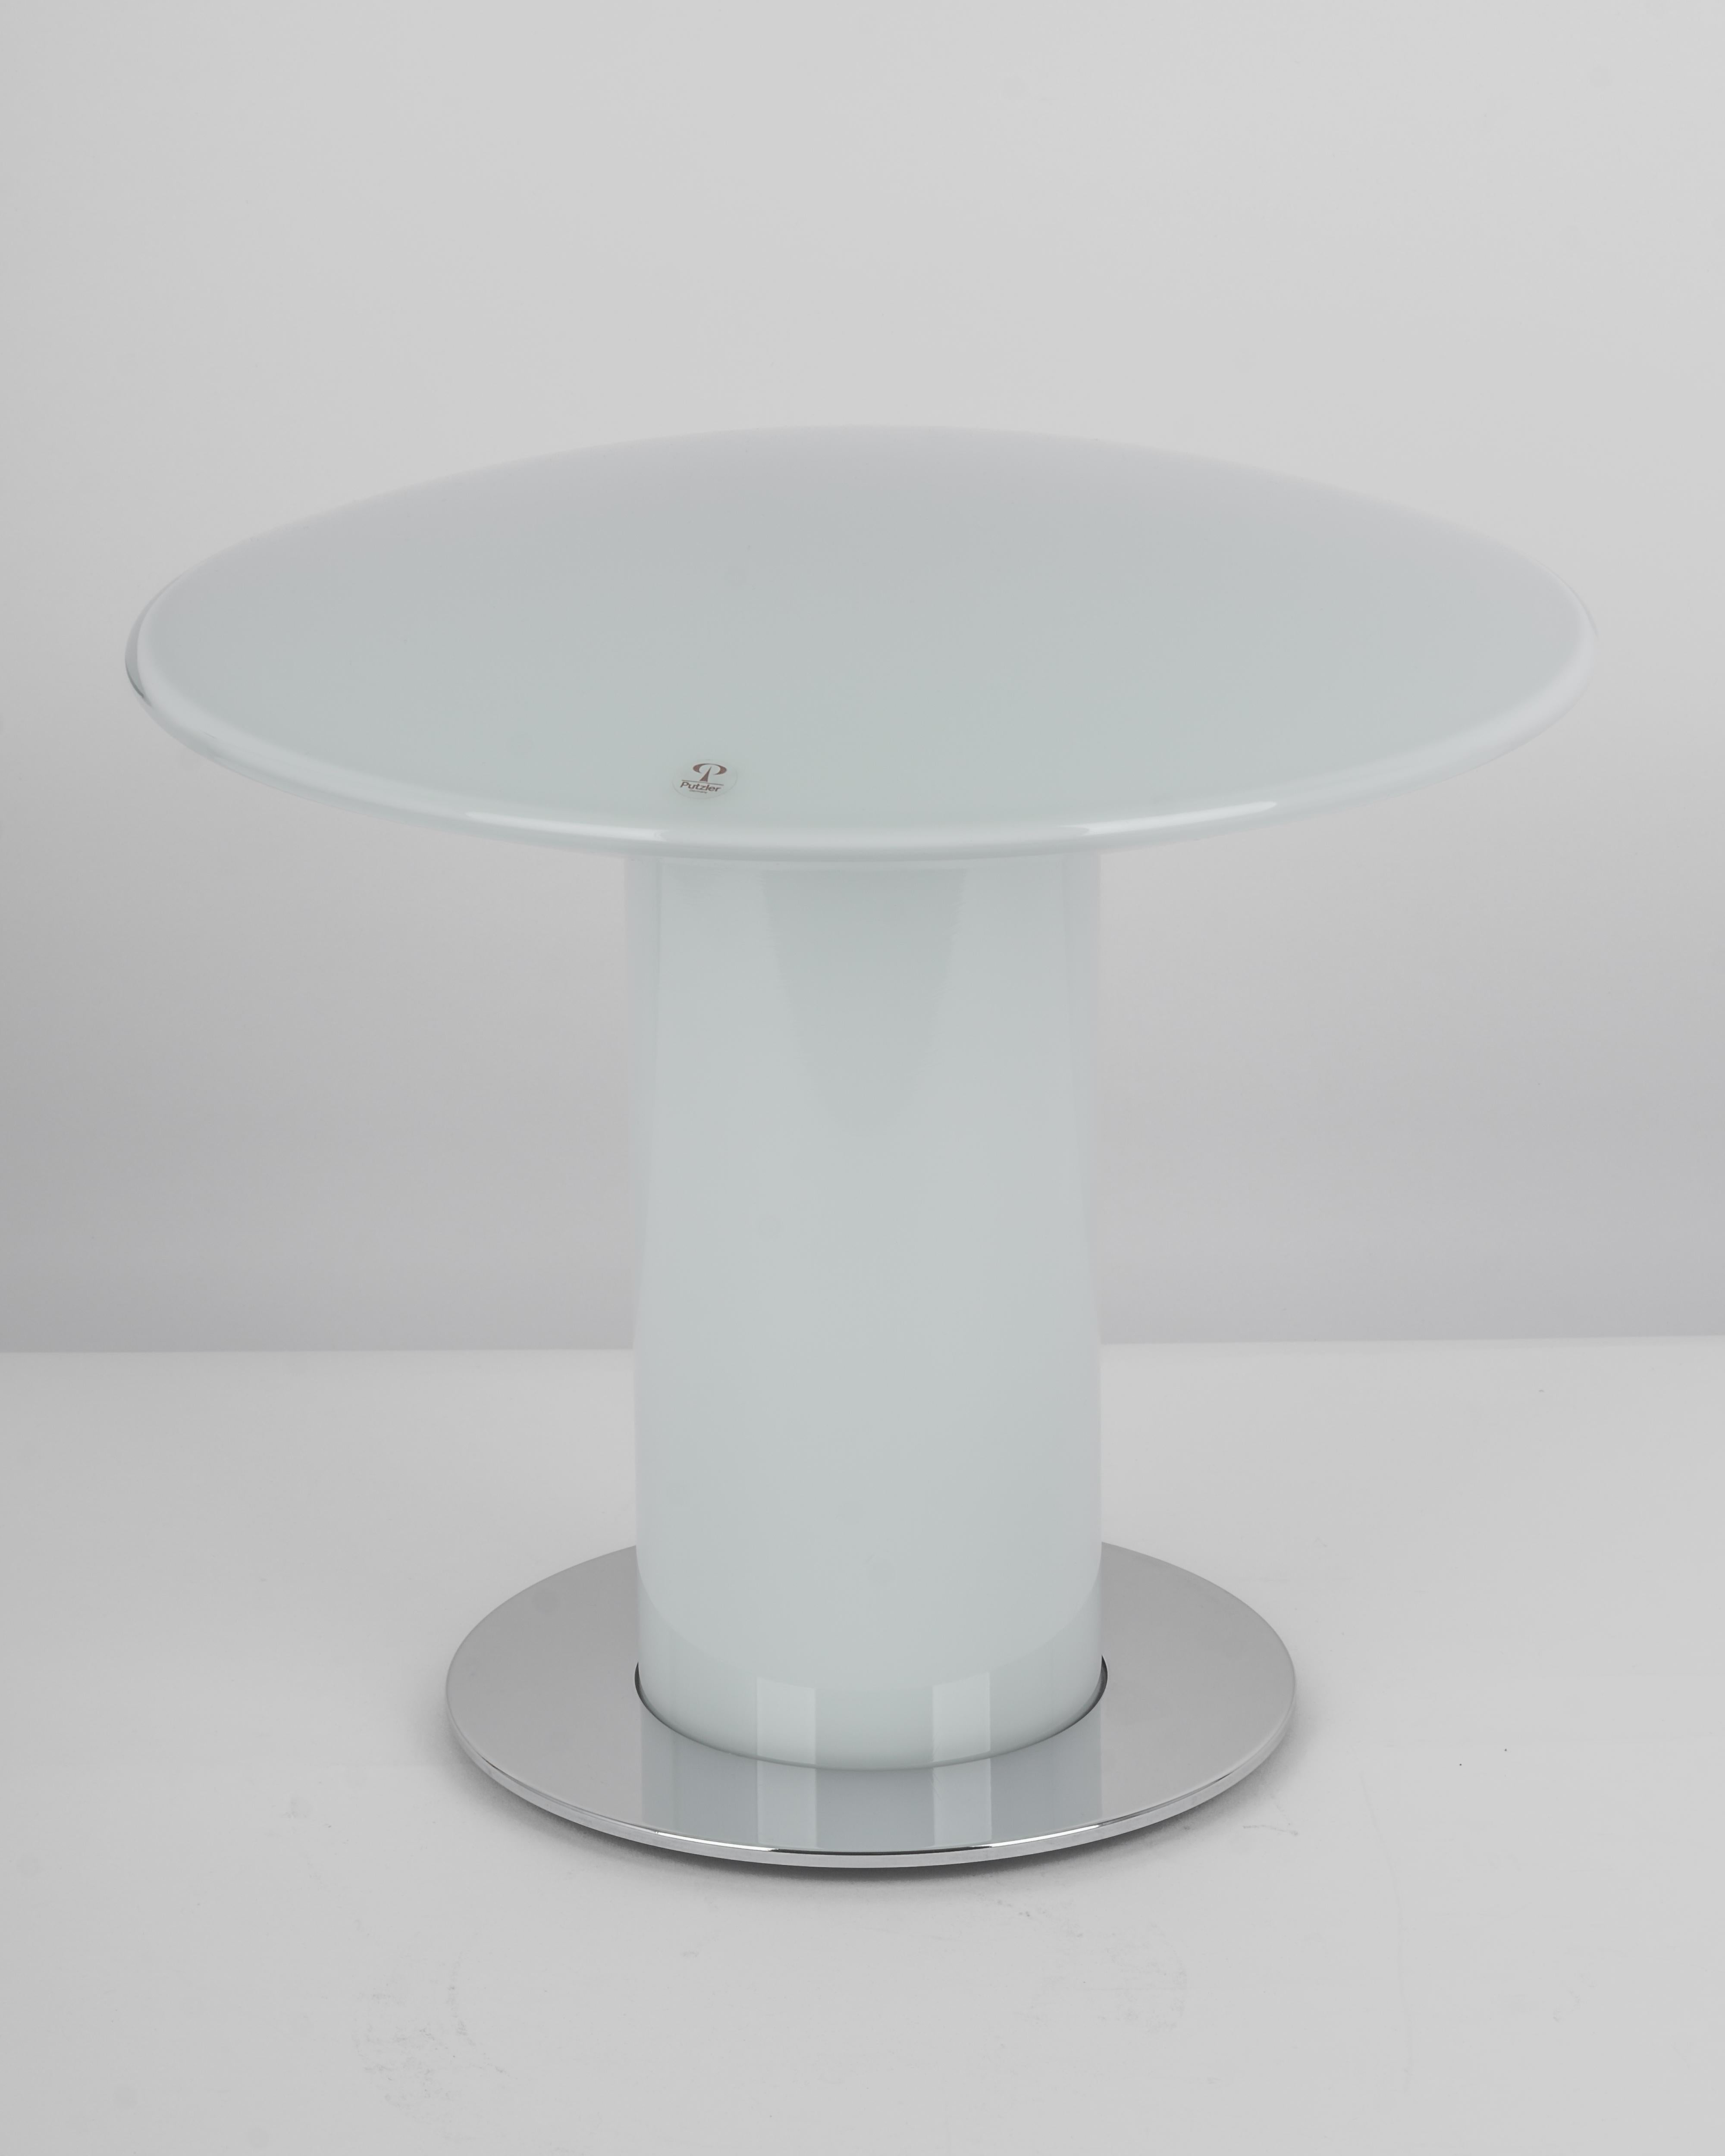 Wonderful mushroom table lamp by Peill & Putzler, Germany, 1970s. Made of a single piece.
Great glass body and its edgy quality contrast nicely with the smooth surface and shape of the mushroom. 

Measures: Large table lamp
Height 30 cm // 11.8